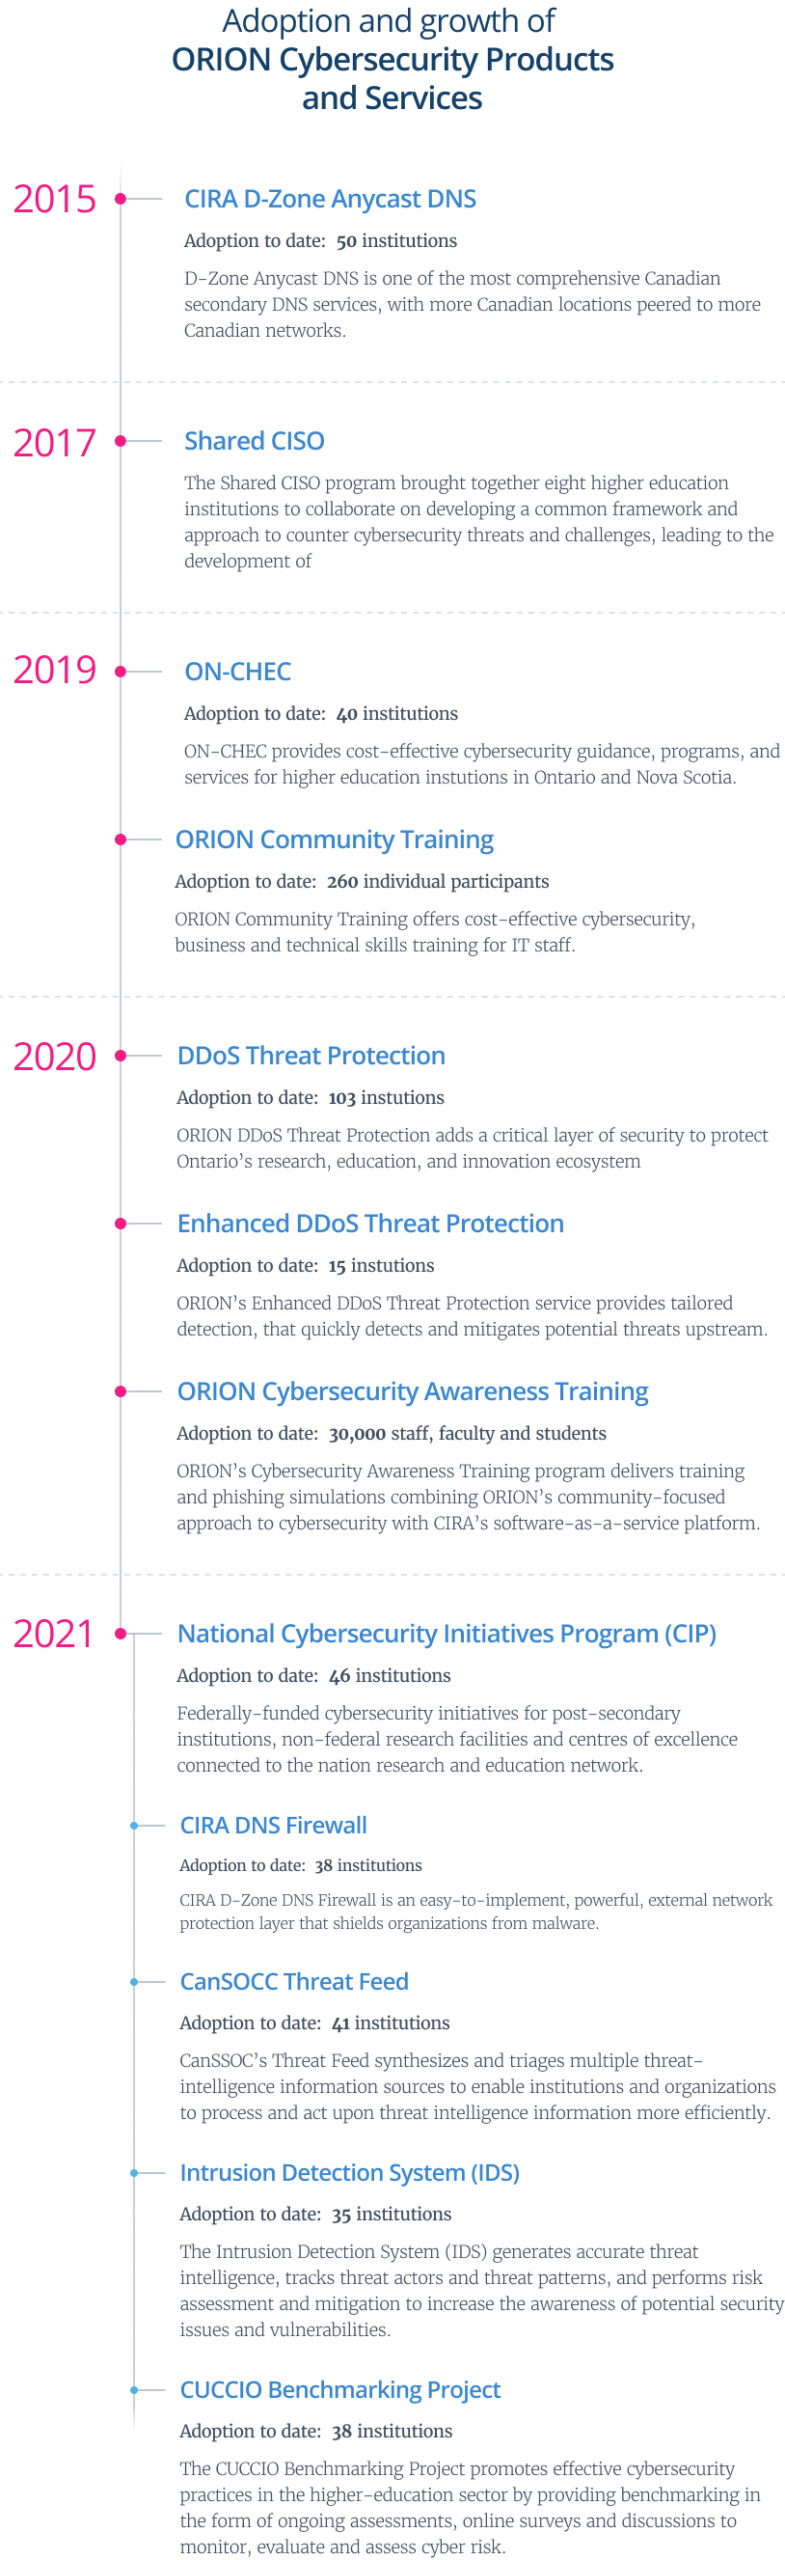 Adoption and growth of ORION Cybersecurity Products and Services timeline graphic